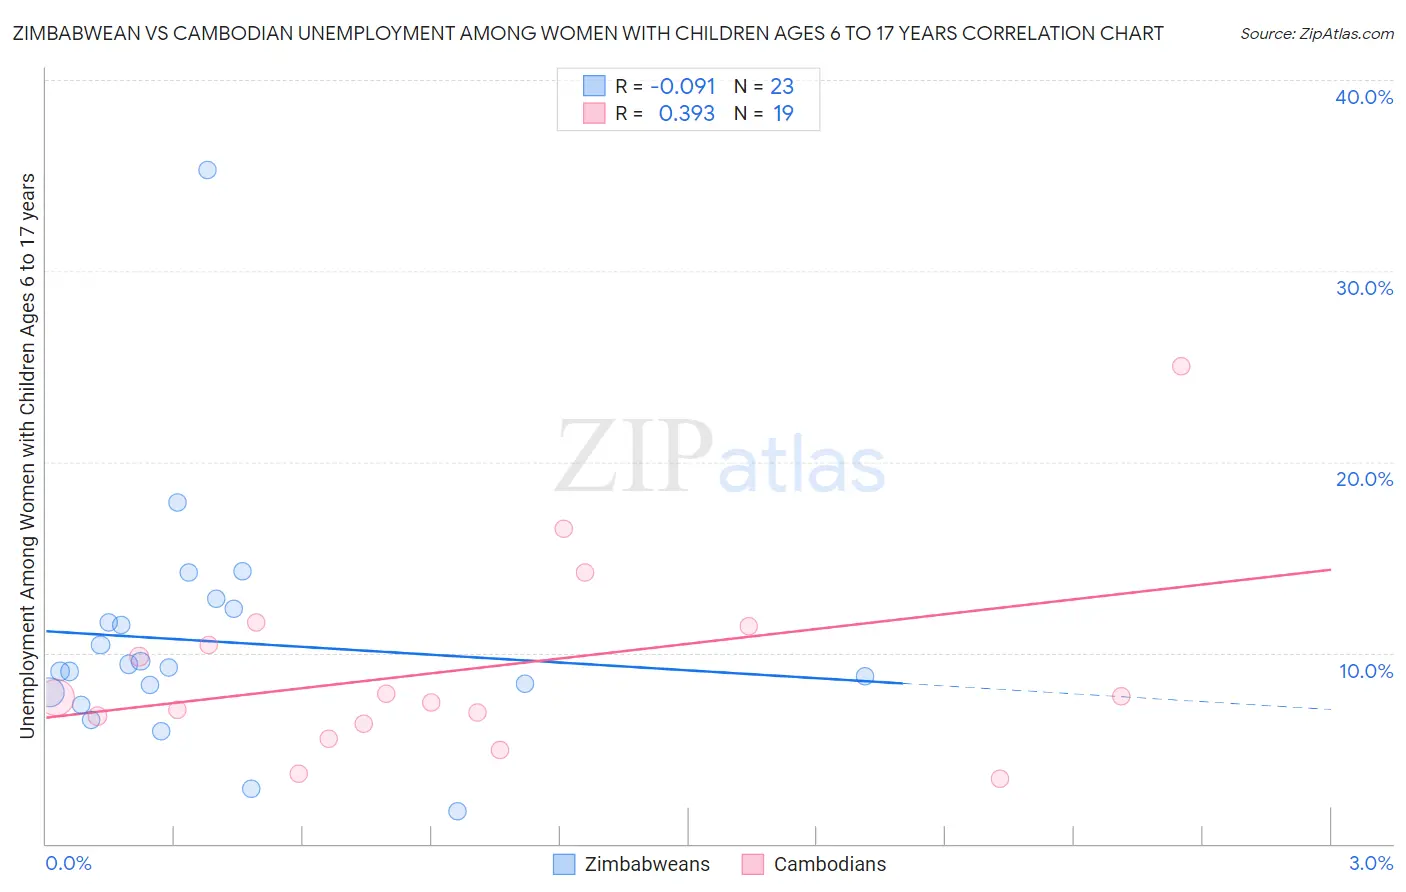 Zimbabwean vs Cambodian Unemployment Among Women with Children Ages 6 to 17 years